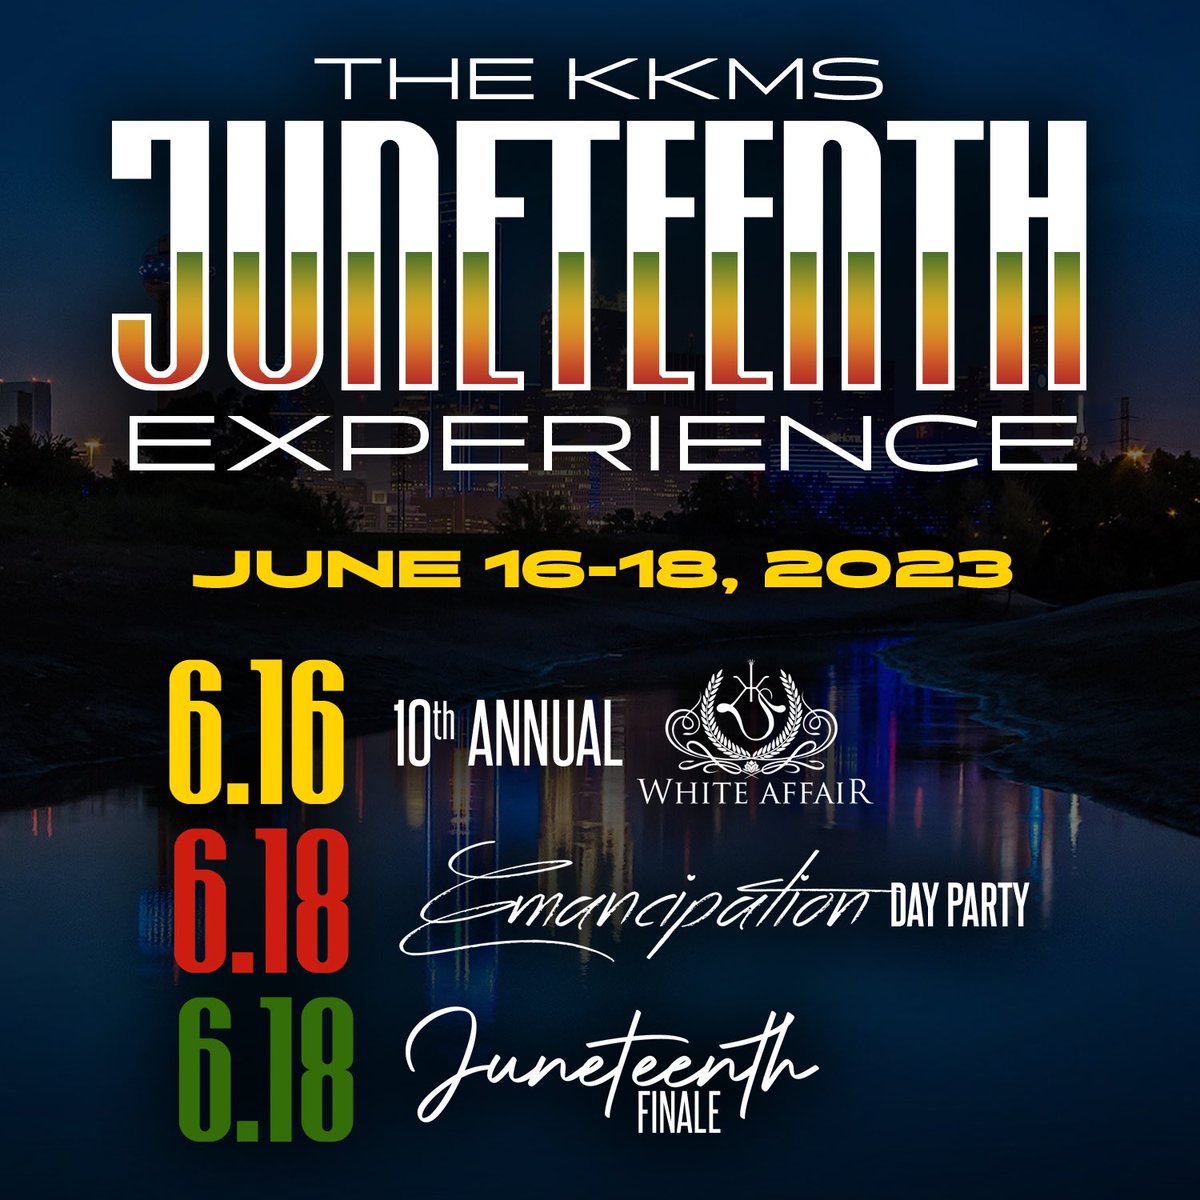 The Distinguished Gentlemen of KKMS present The 2023 KKMS Juneteenth Experience In Dallas, Texas.

Another KKMS Juneteenth experience that you don't want to miss. kkmsdallas.com

#KKMS #TheDistinguishedGents #juneteenth2023 #dallastexas #sundayfunday #dallasjuneteenth